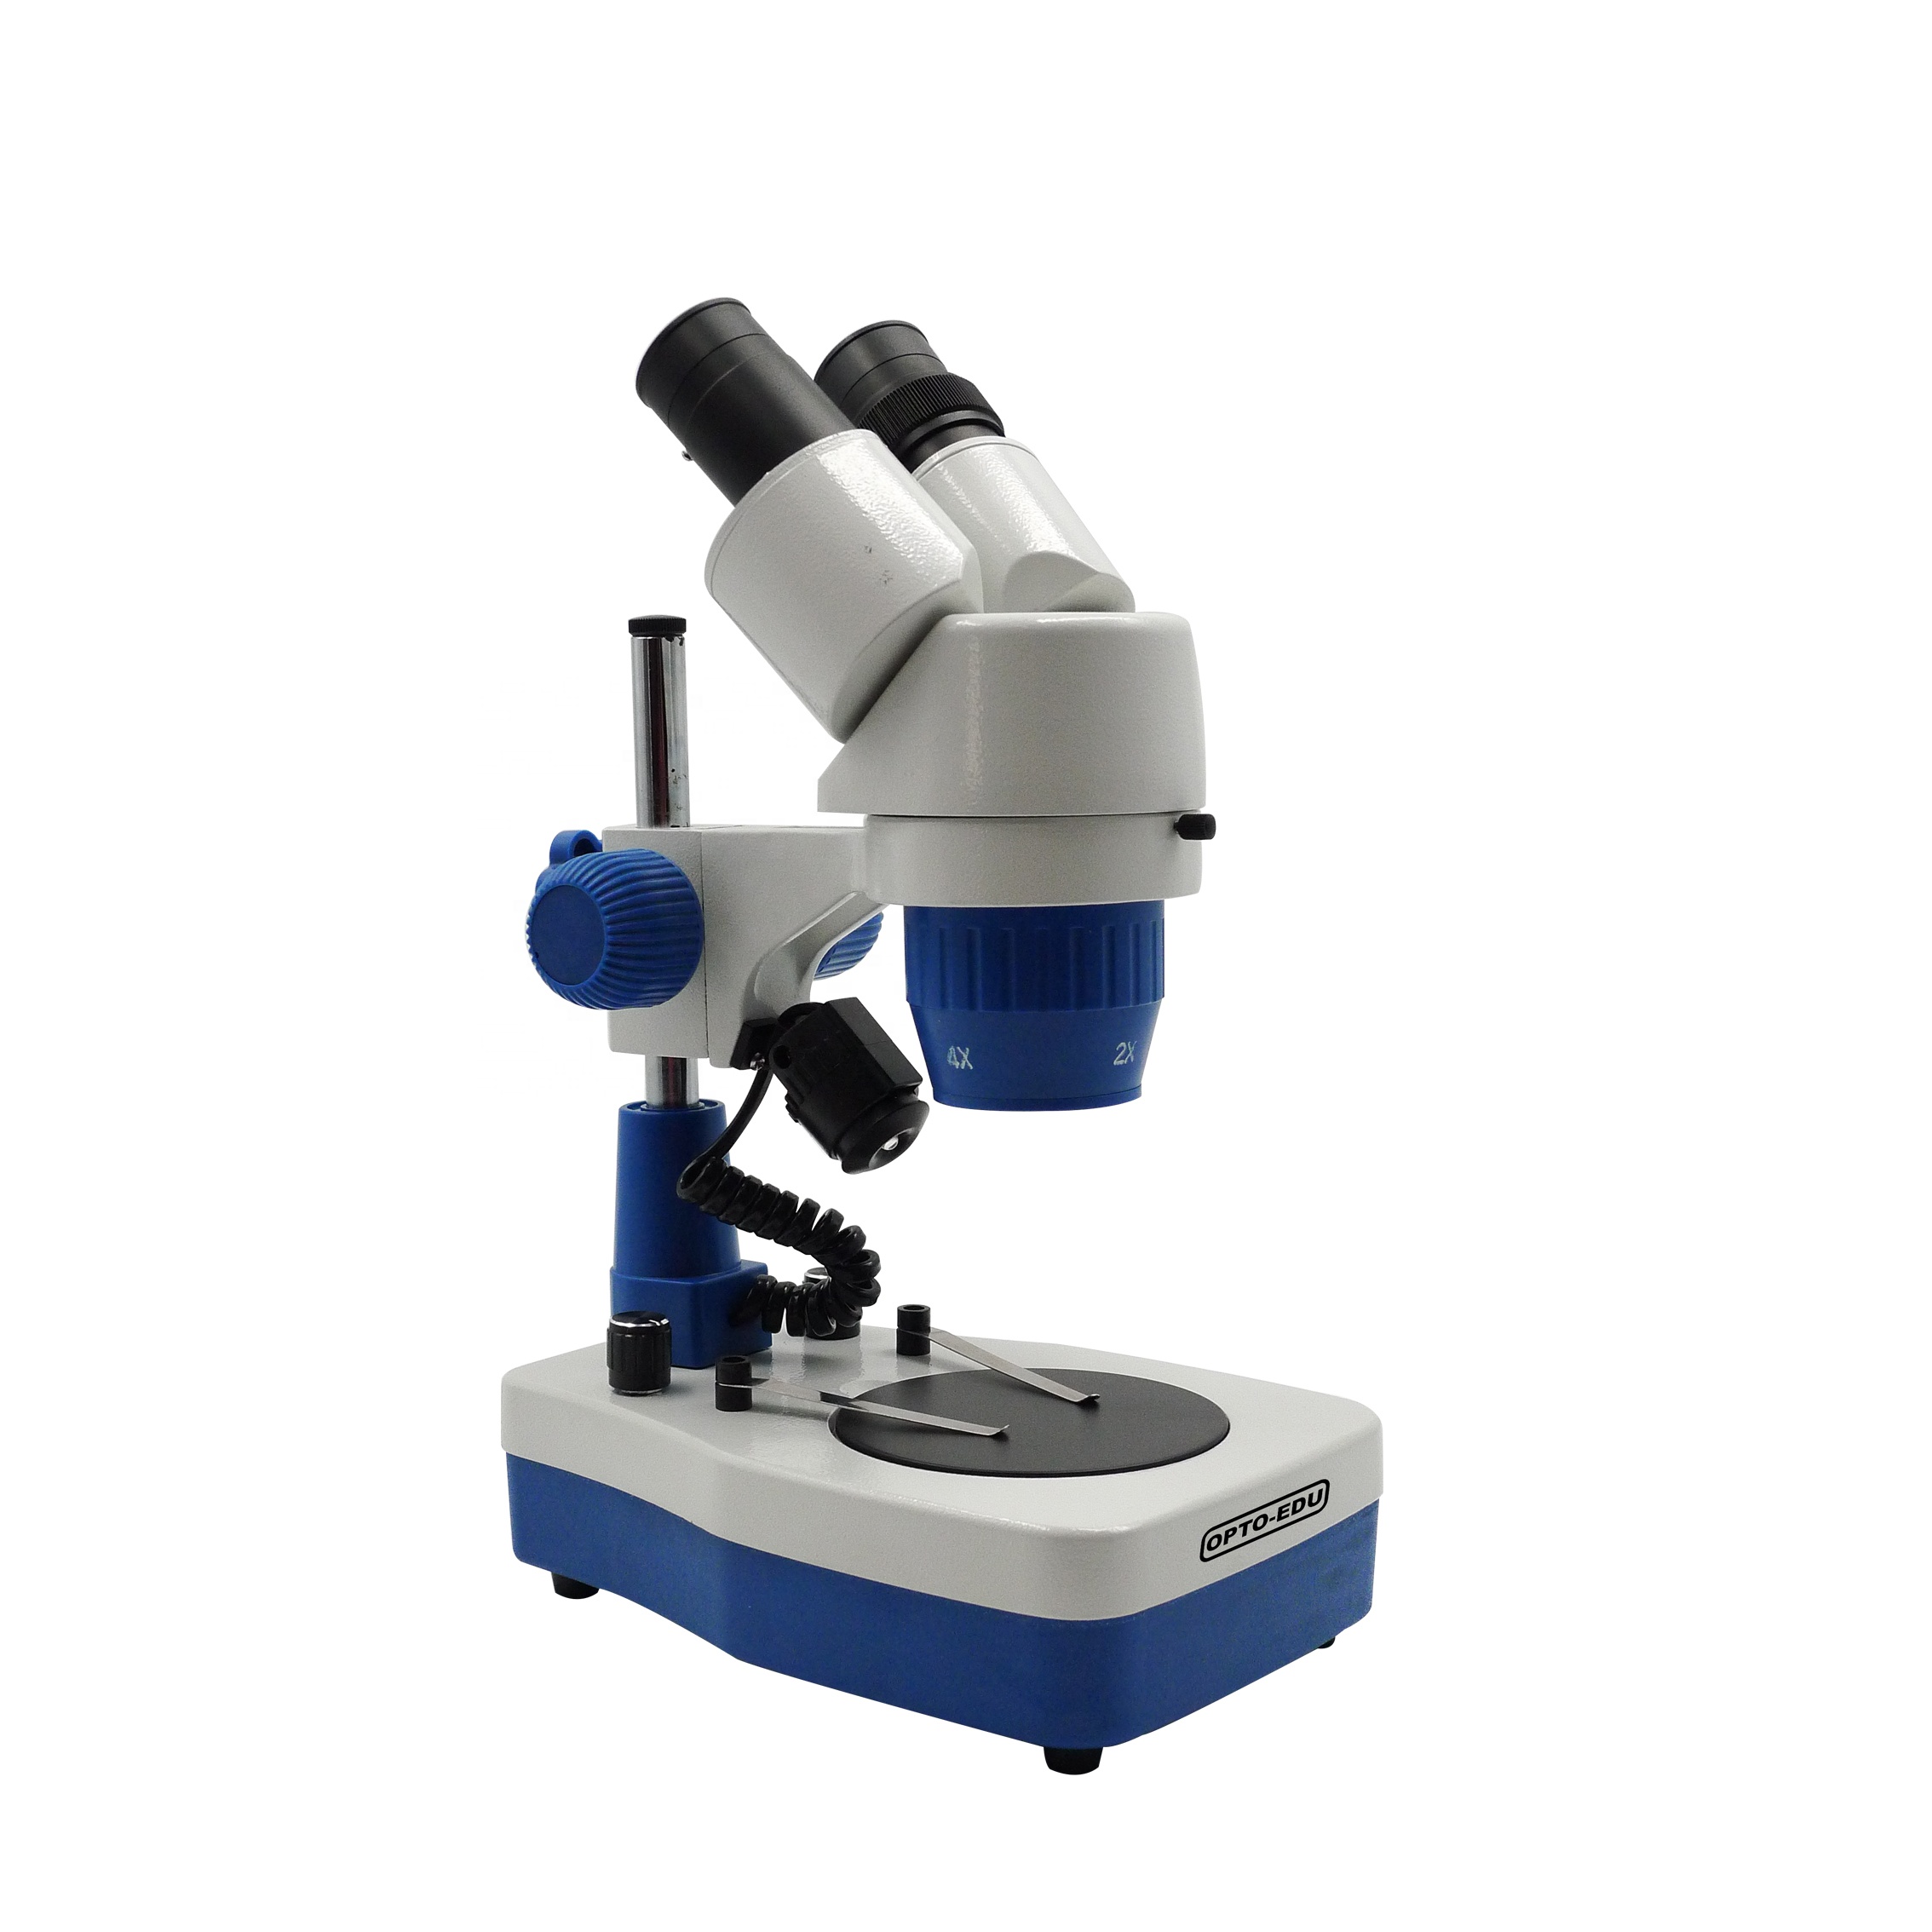 The transmission electron microscope and cell biology